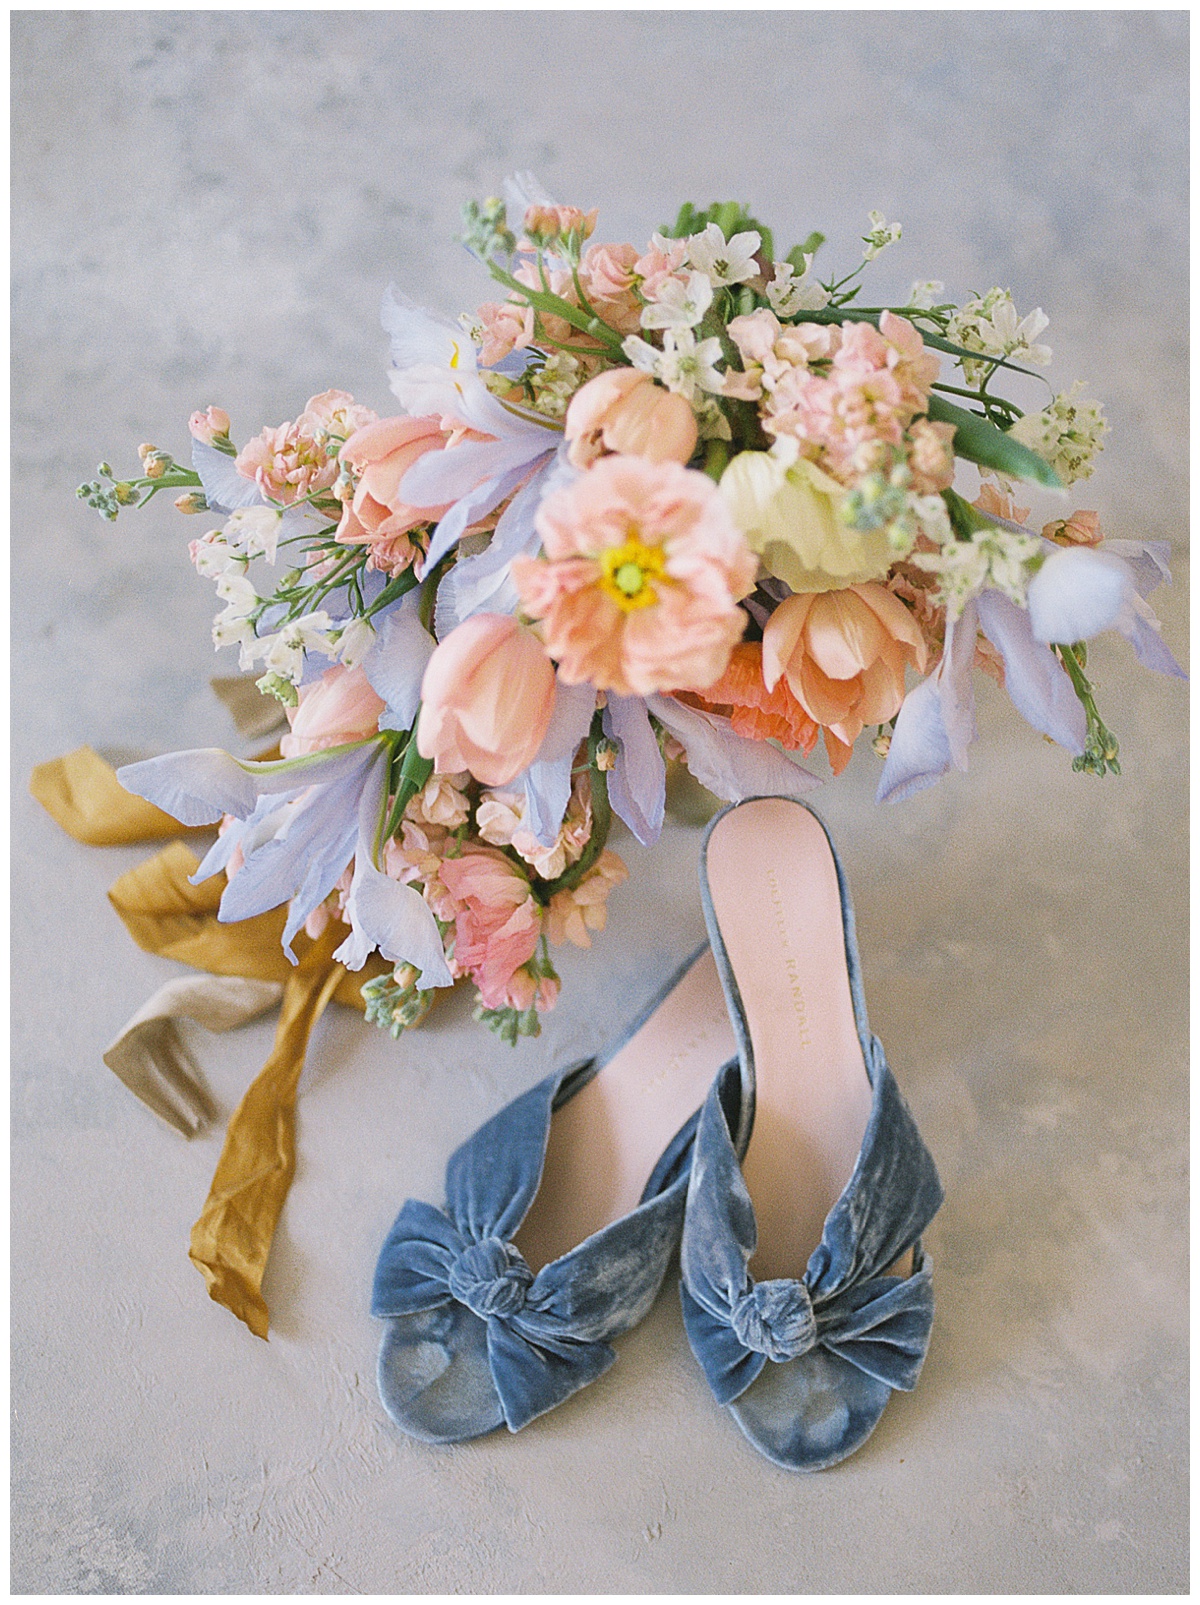 Blue Bridal Shoes, DC Weddings, Anna Wright Photography